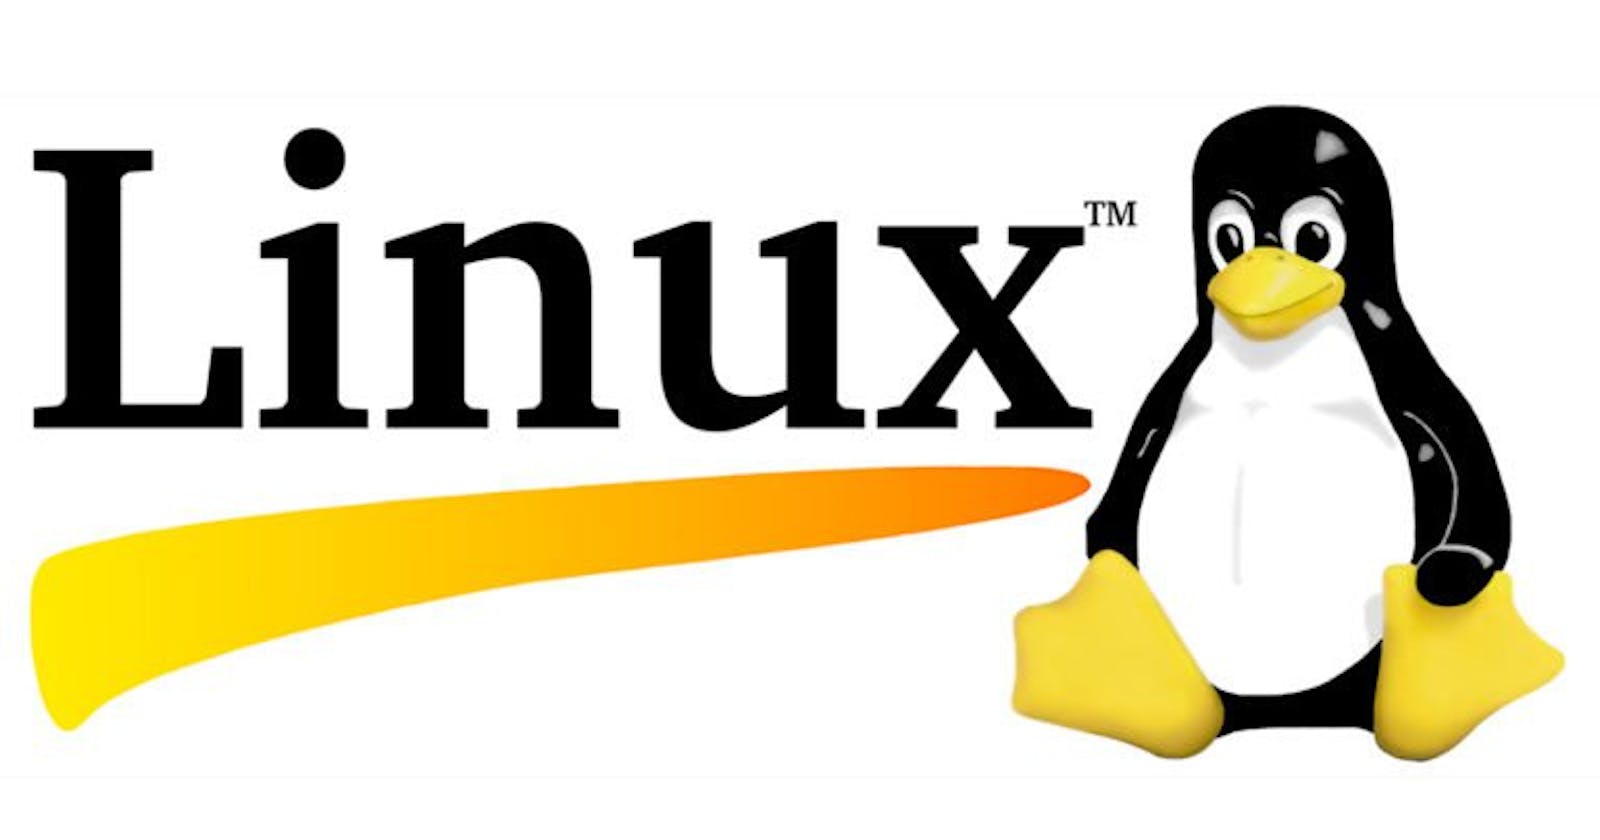 Day 2 - Basic fundamentals of Linux